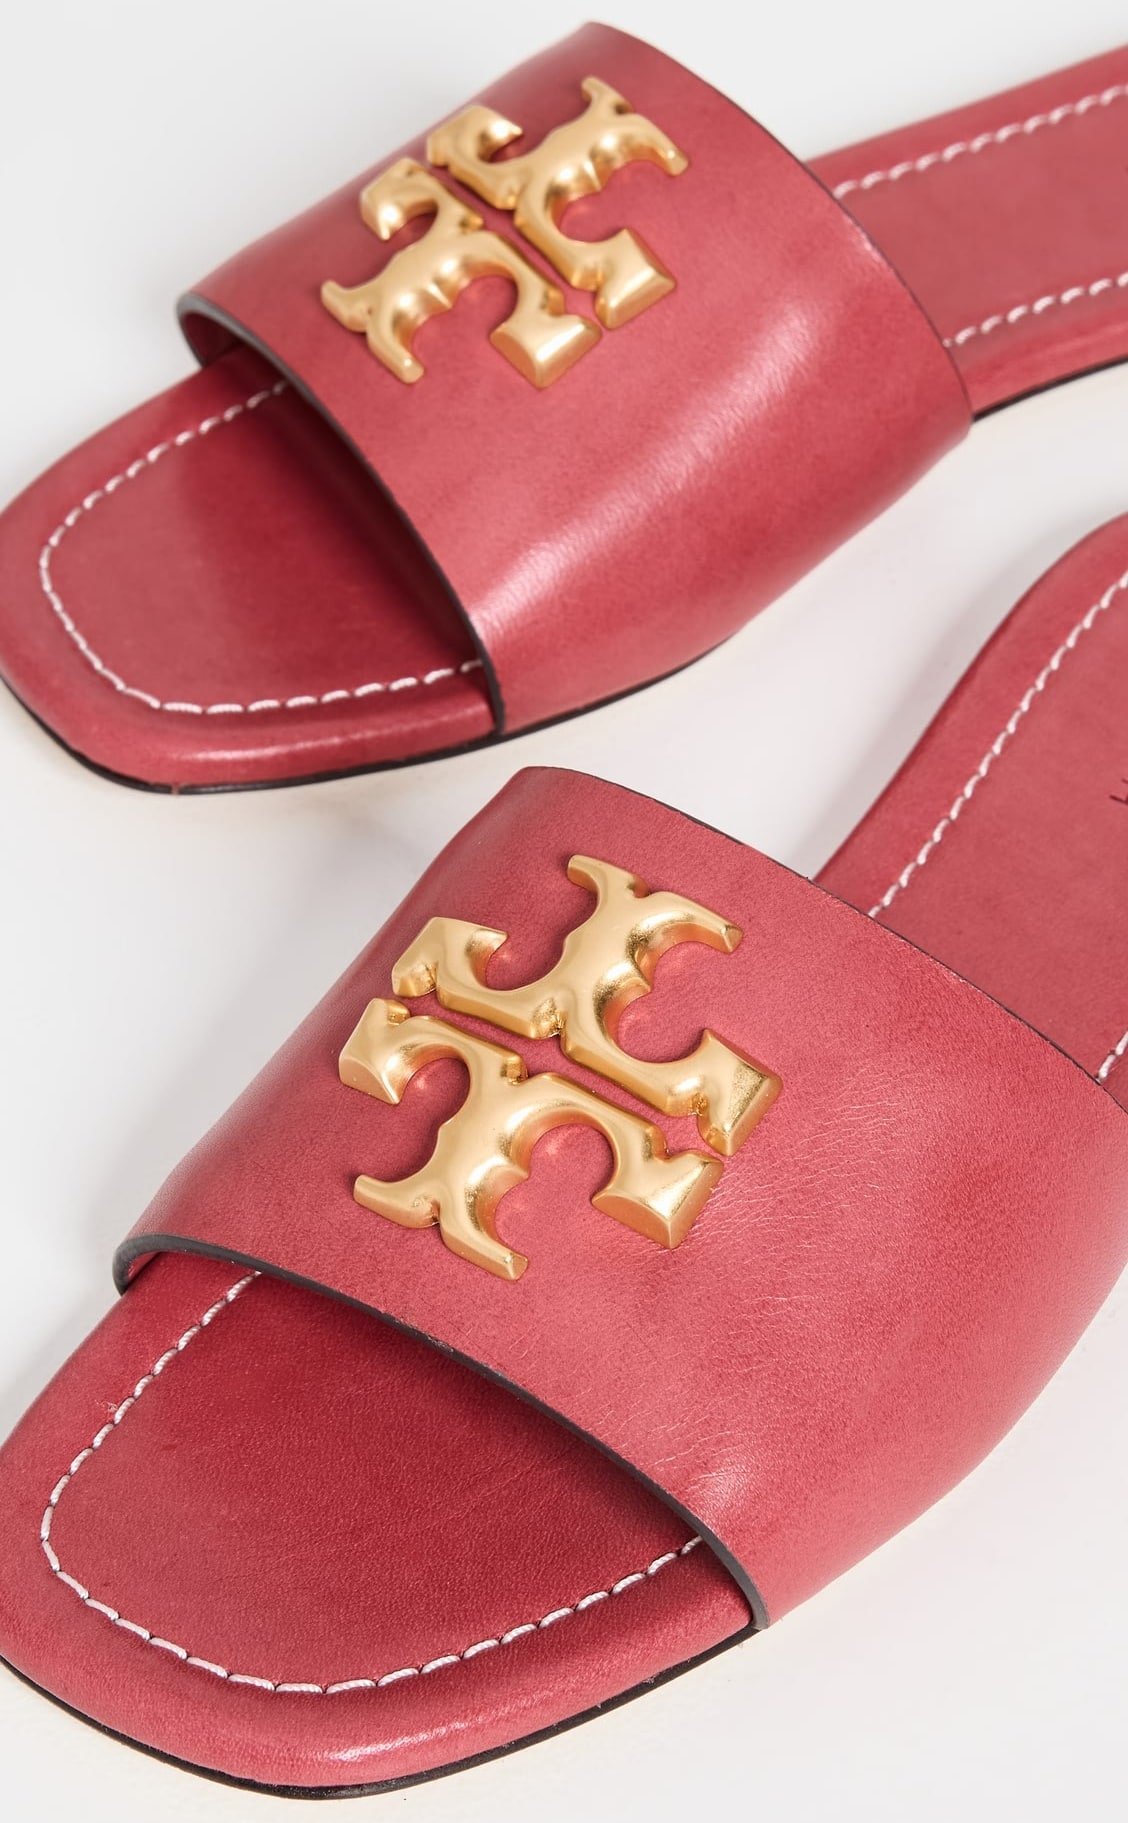 Tory Burch is an attainable luxury brand and her shoes feature stitching that is neat and consistent throughout